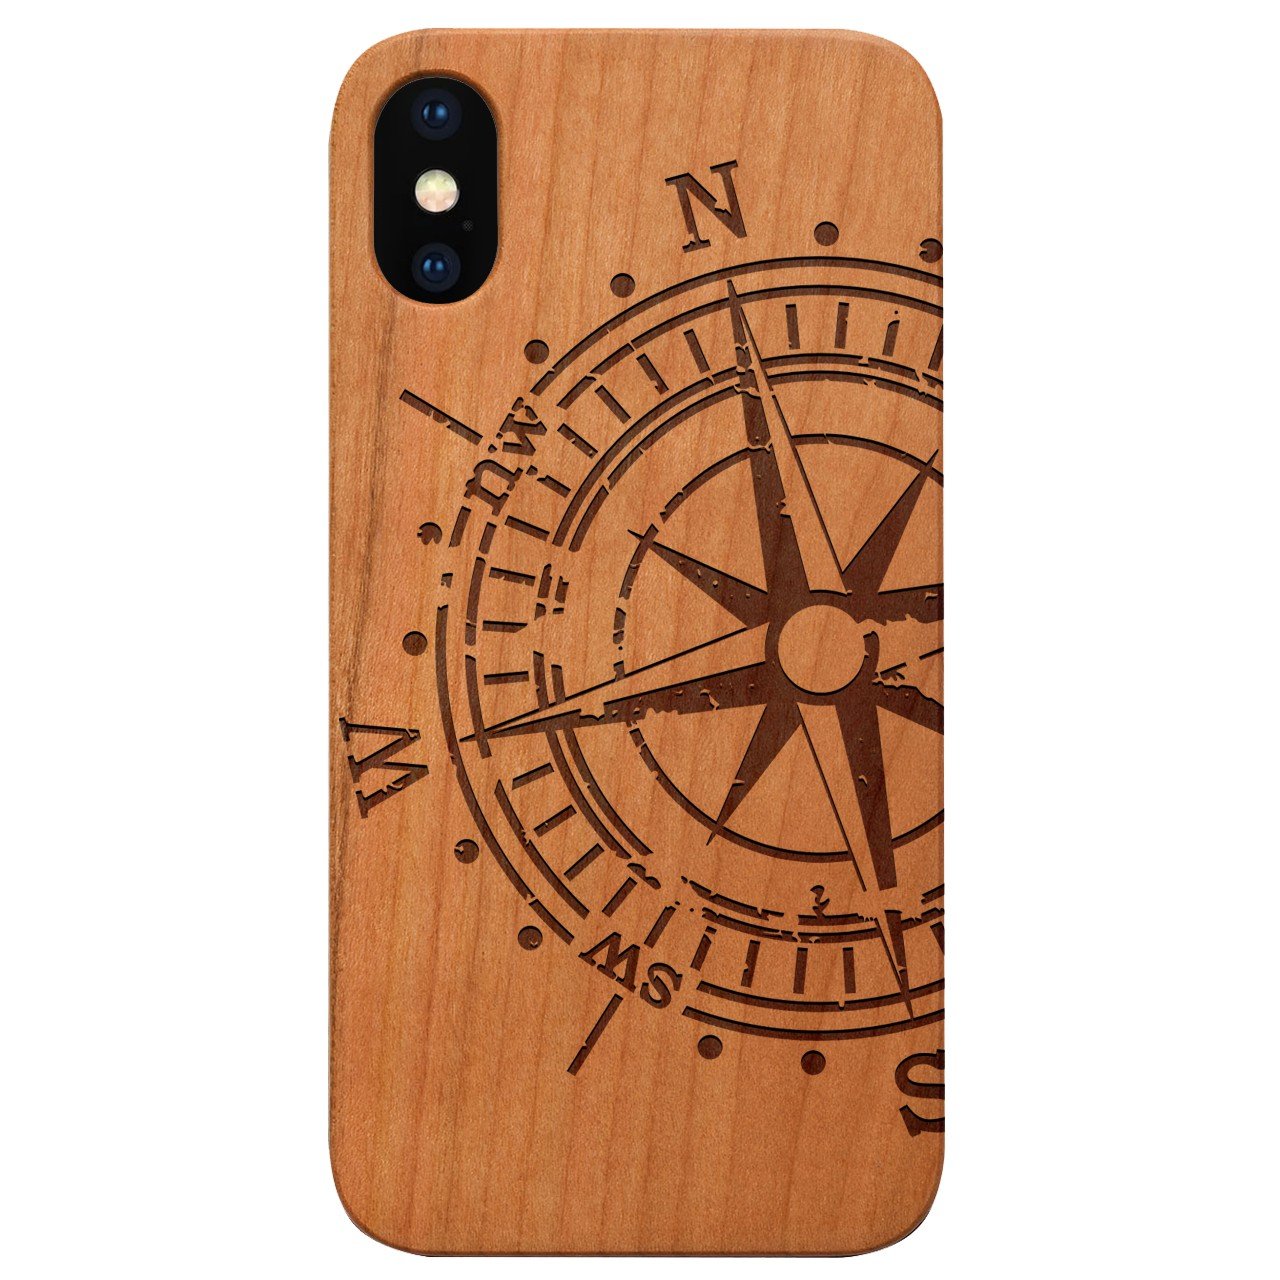 Big Compass - Engraved - Wooden Phone Case